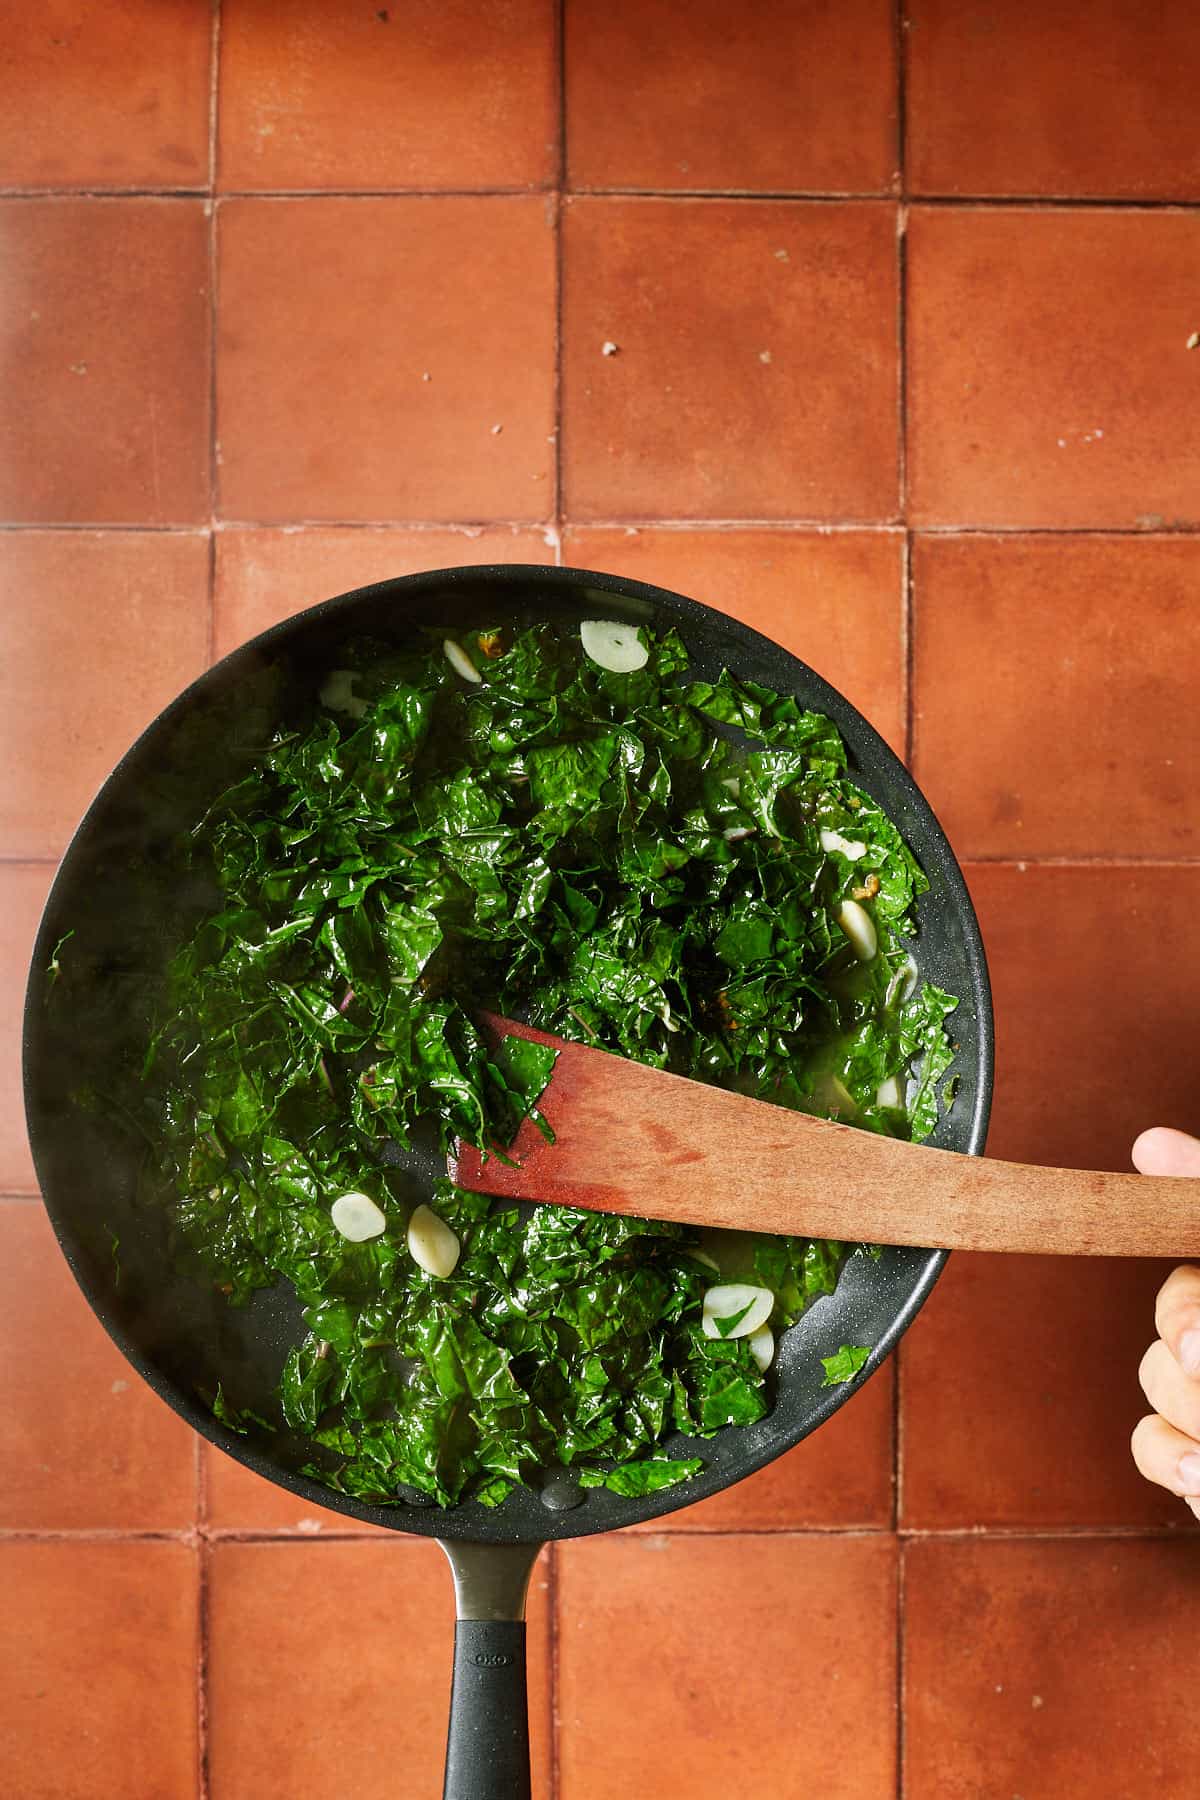 kale cooking down in the pan with sauce and garlic